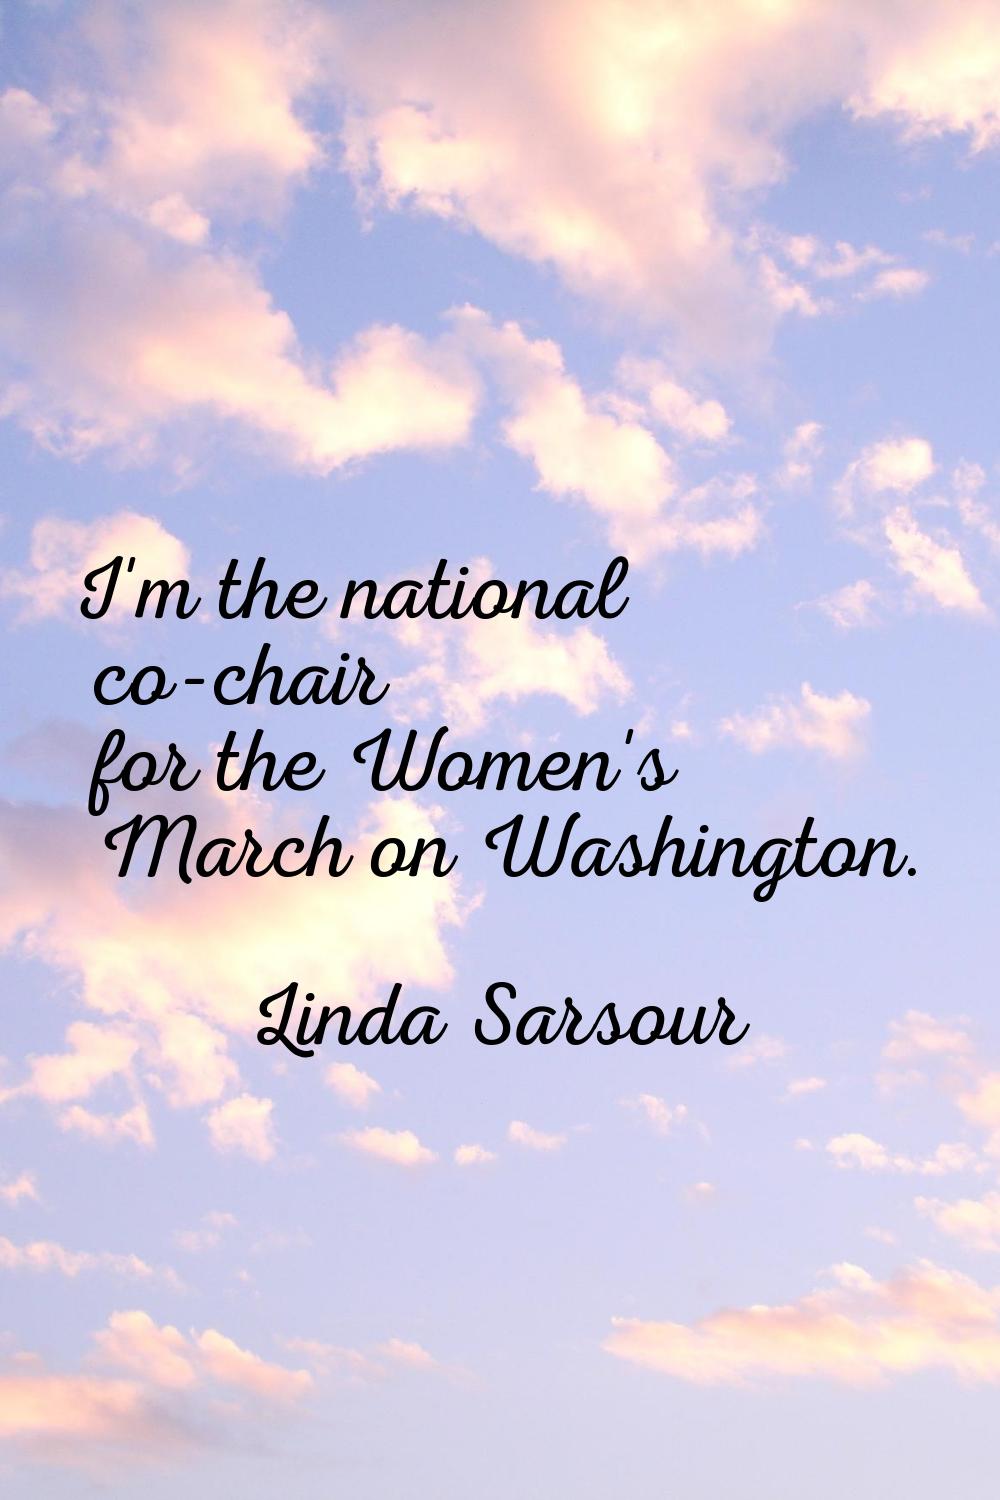 I'm the national co-chair for the Women's March on Washington.